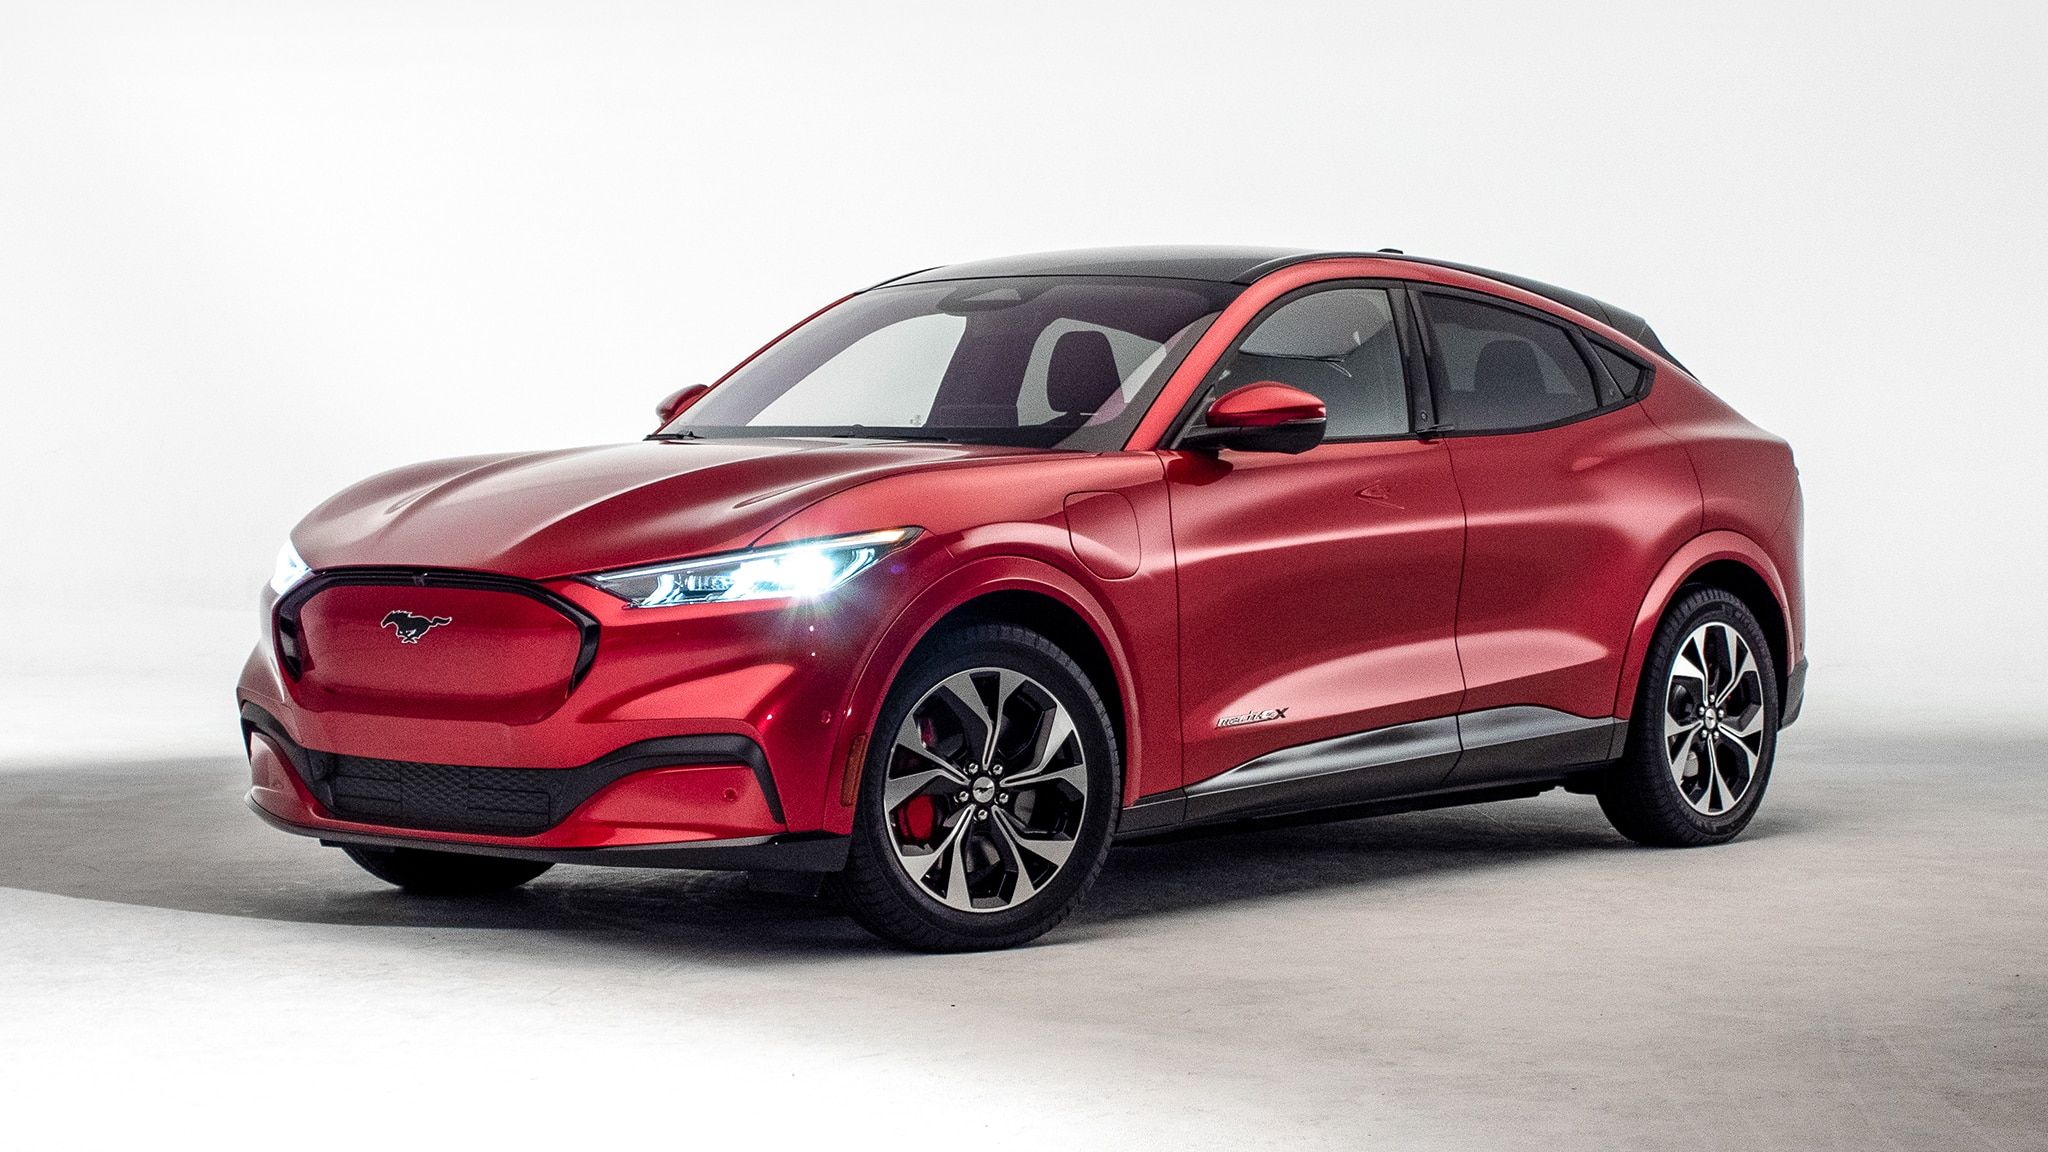 Ford Mustang Mach E Revealed! An Electric Mustang SUV? Believe It